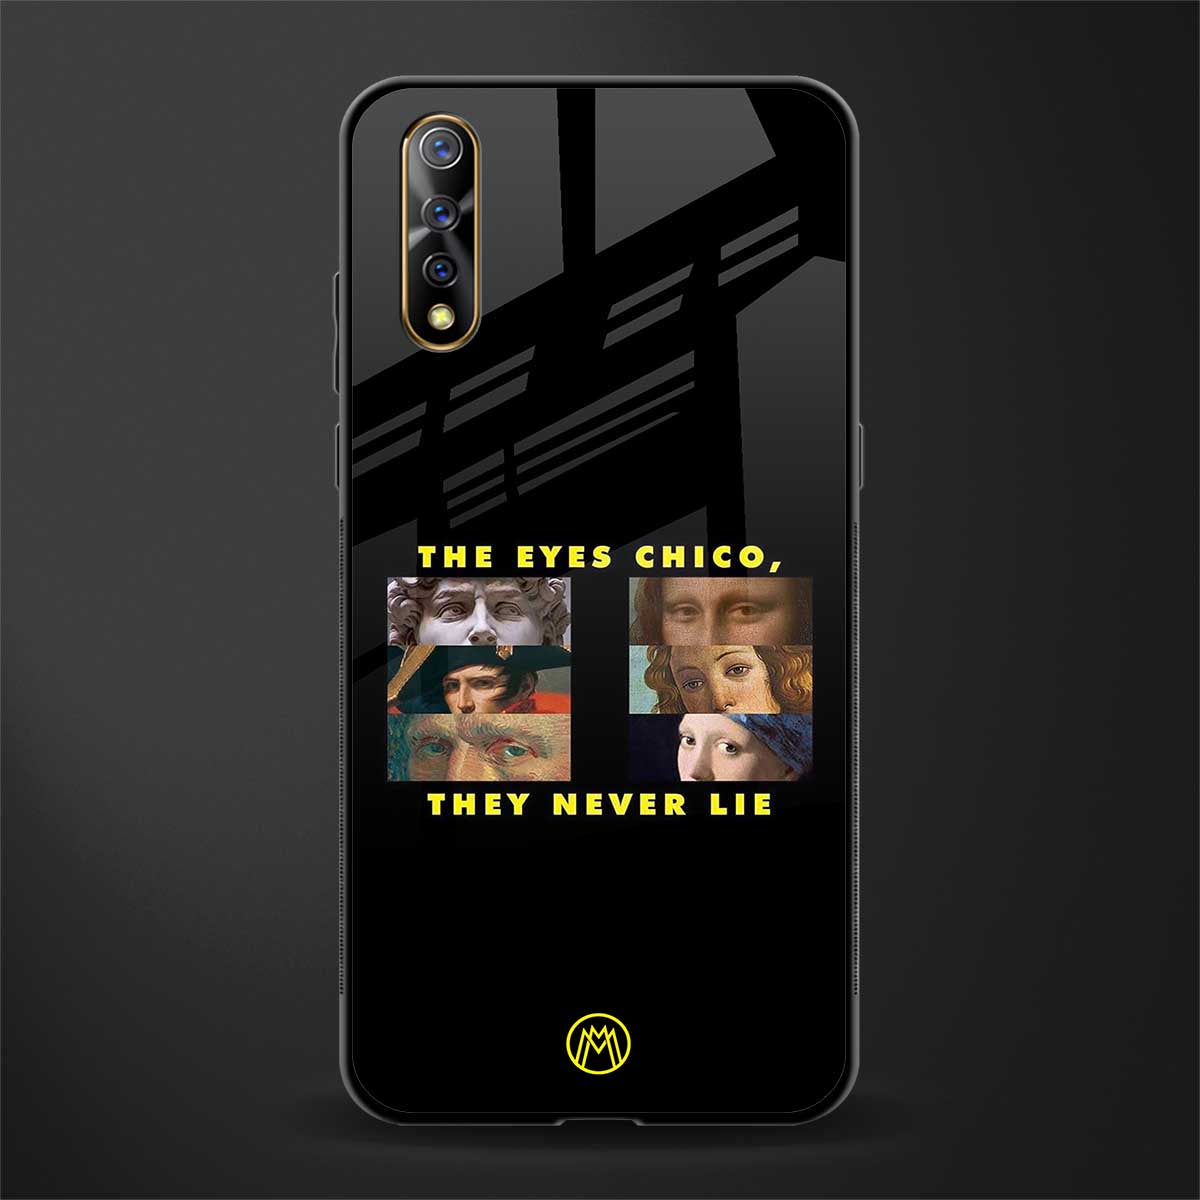 the eyes chico, they never lie movie quote glass case for vivo s1 image